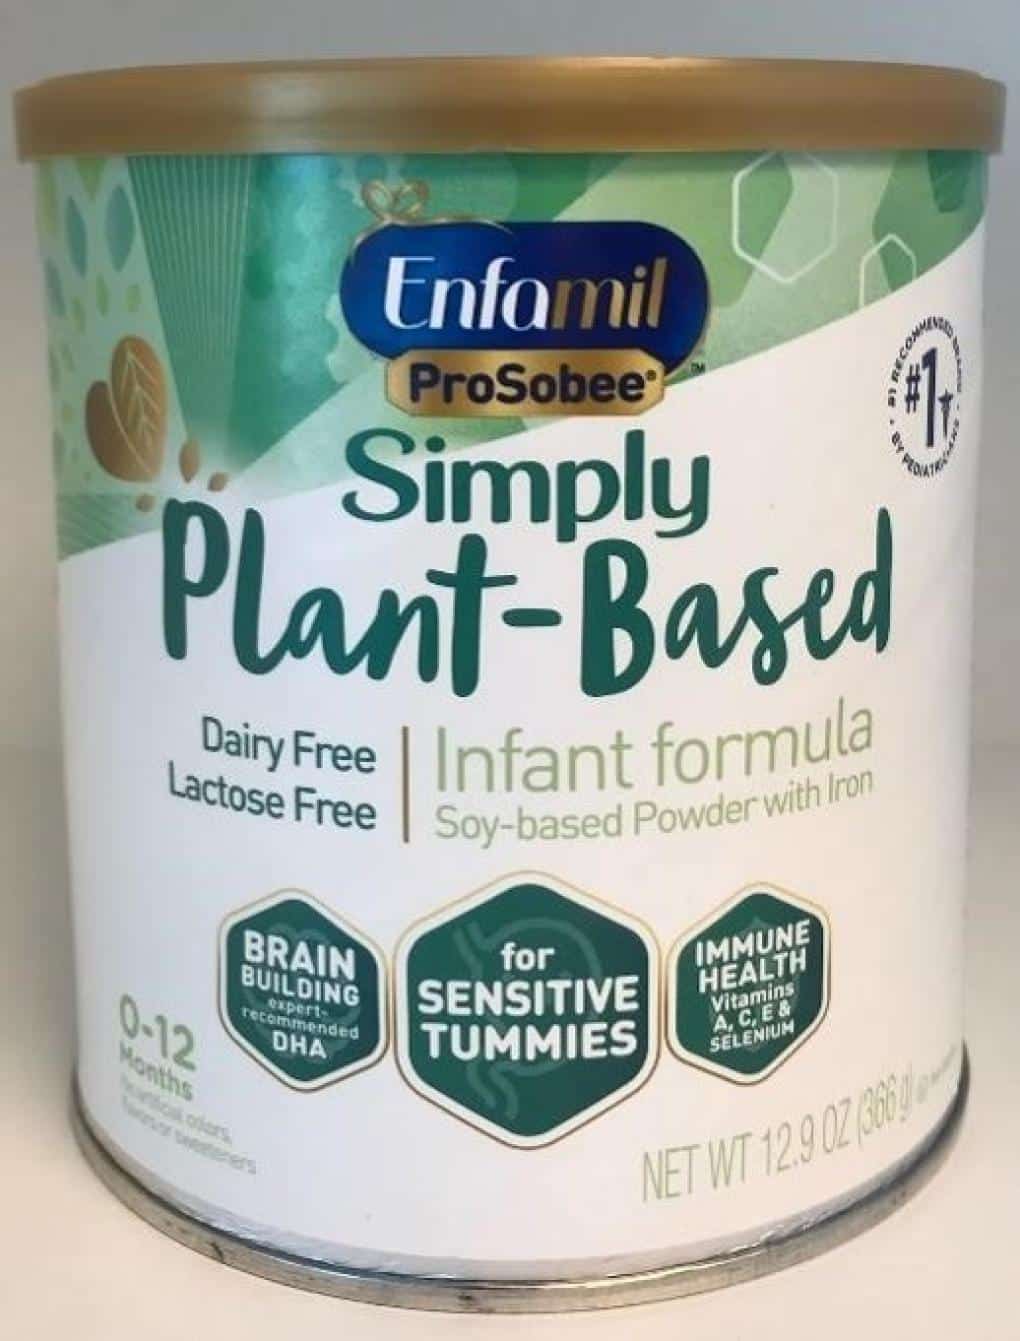 Enfamil ProSobee Baby Formula Recalled for Deadly Infection Risk